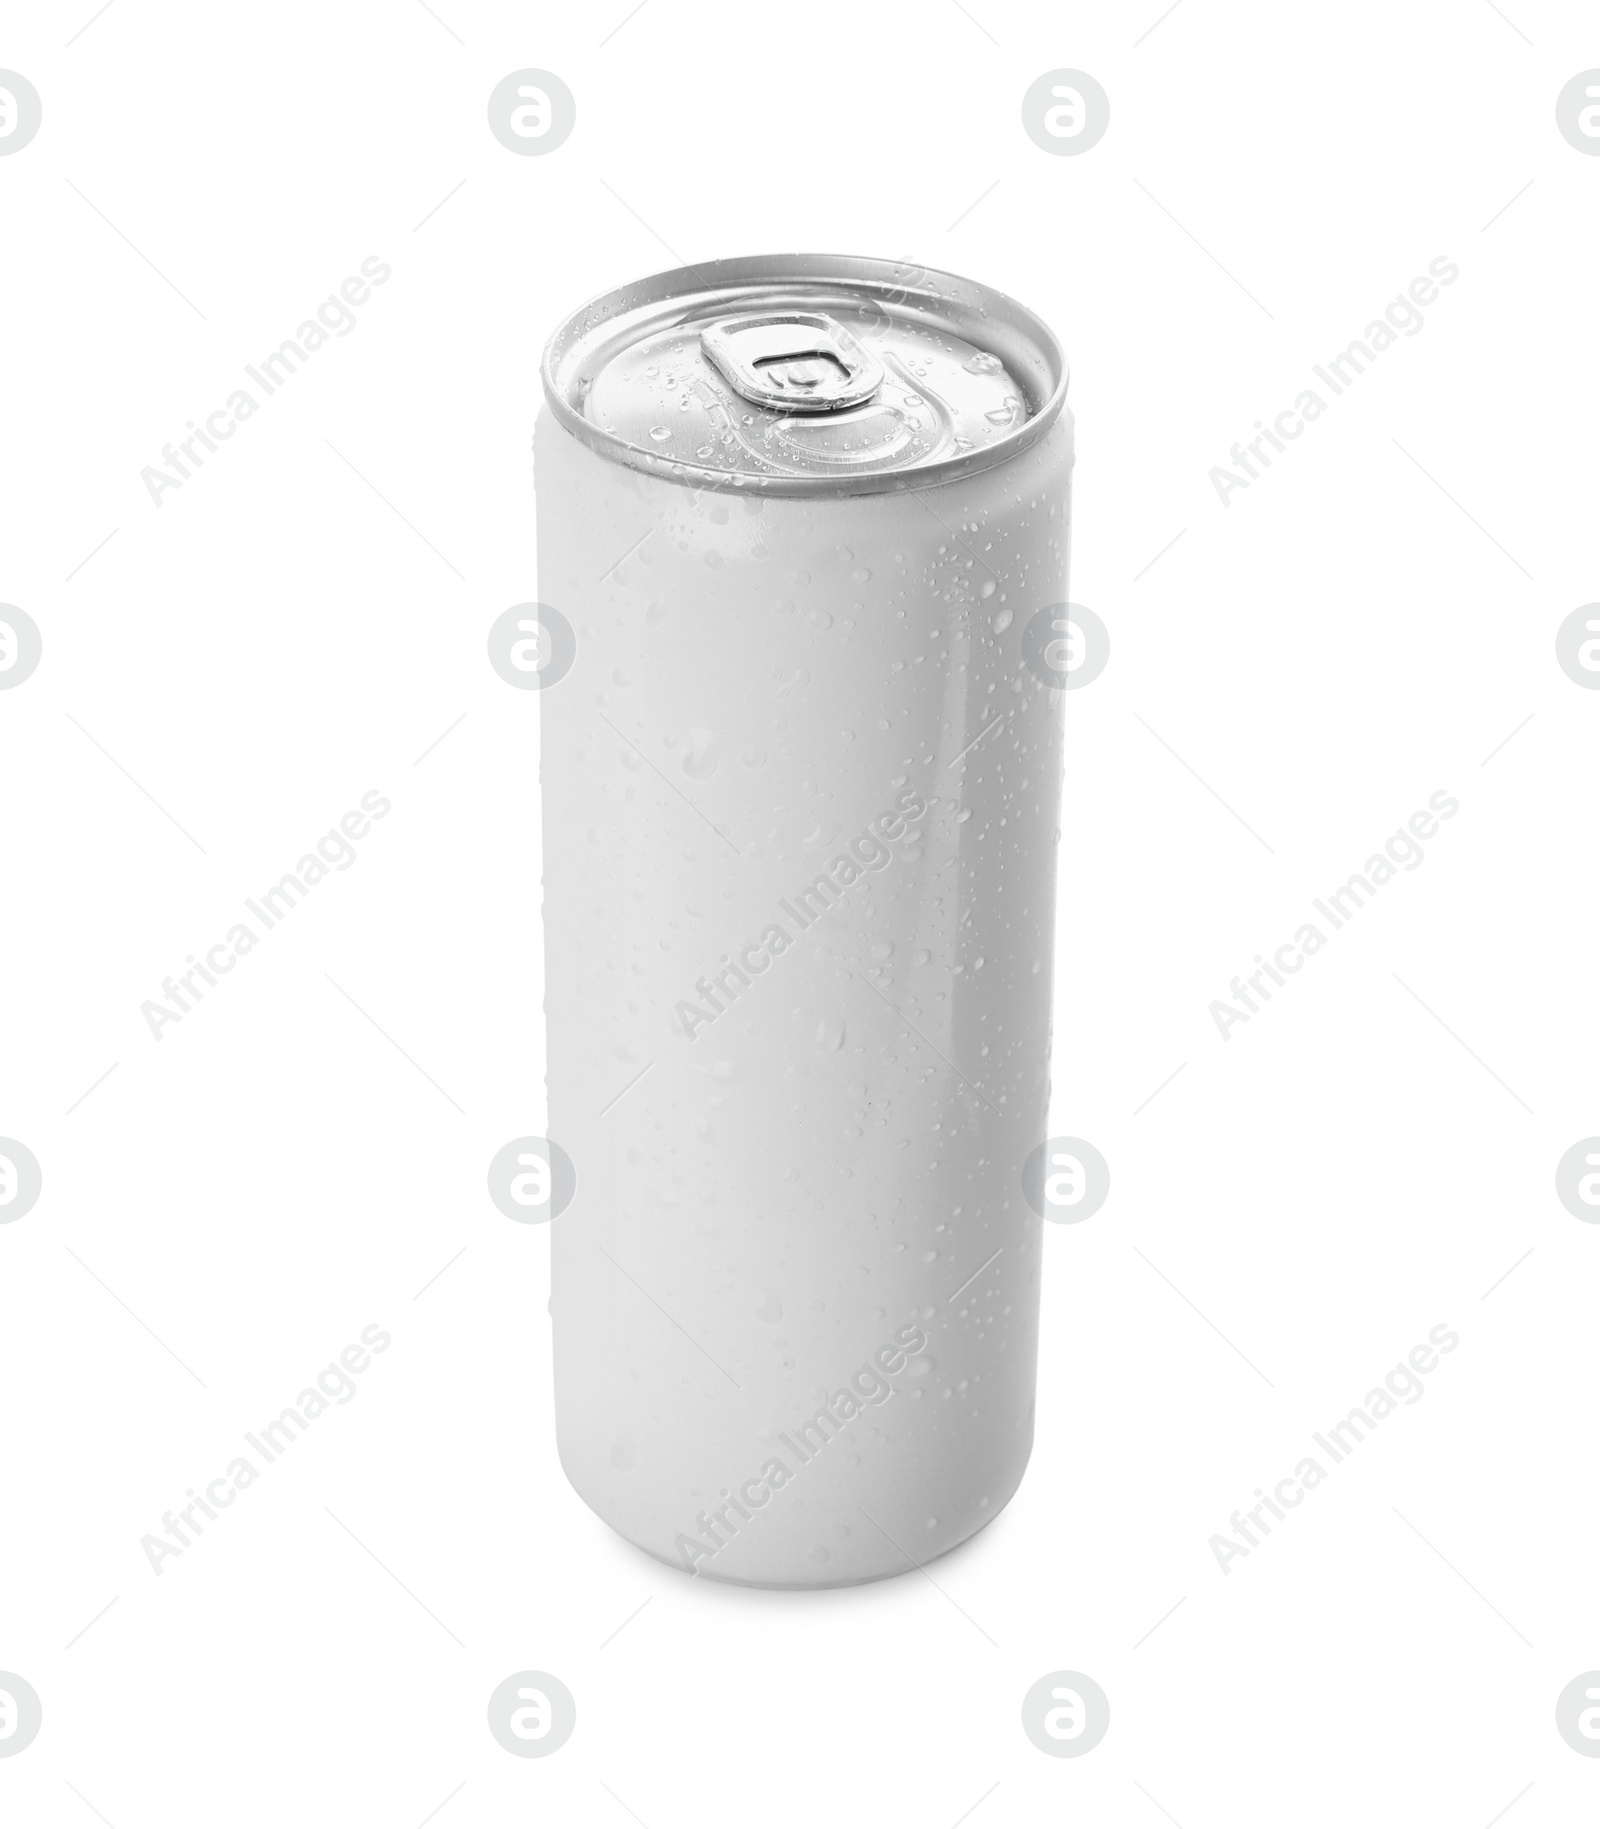 Photo of Can of energy drink with water drops isolated on white. Mockup for design